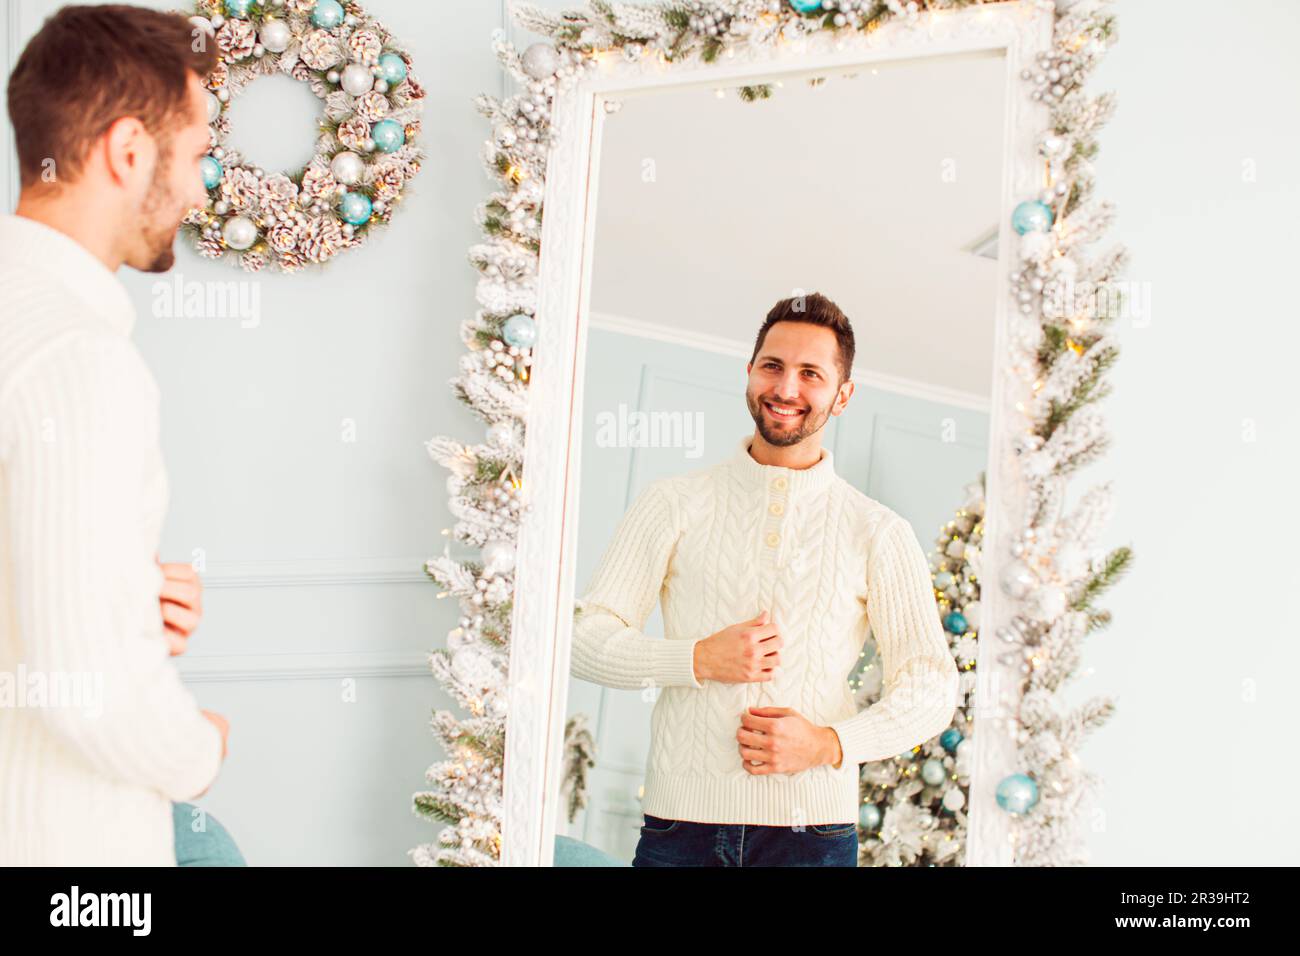 Portrait of young man near large mirror Stock Photo